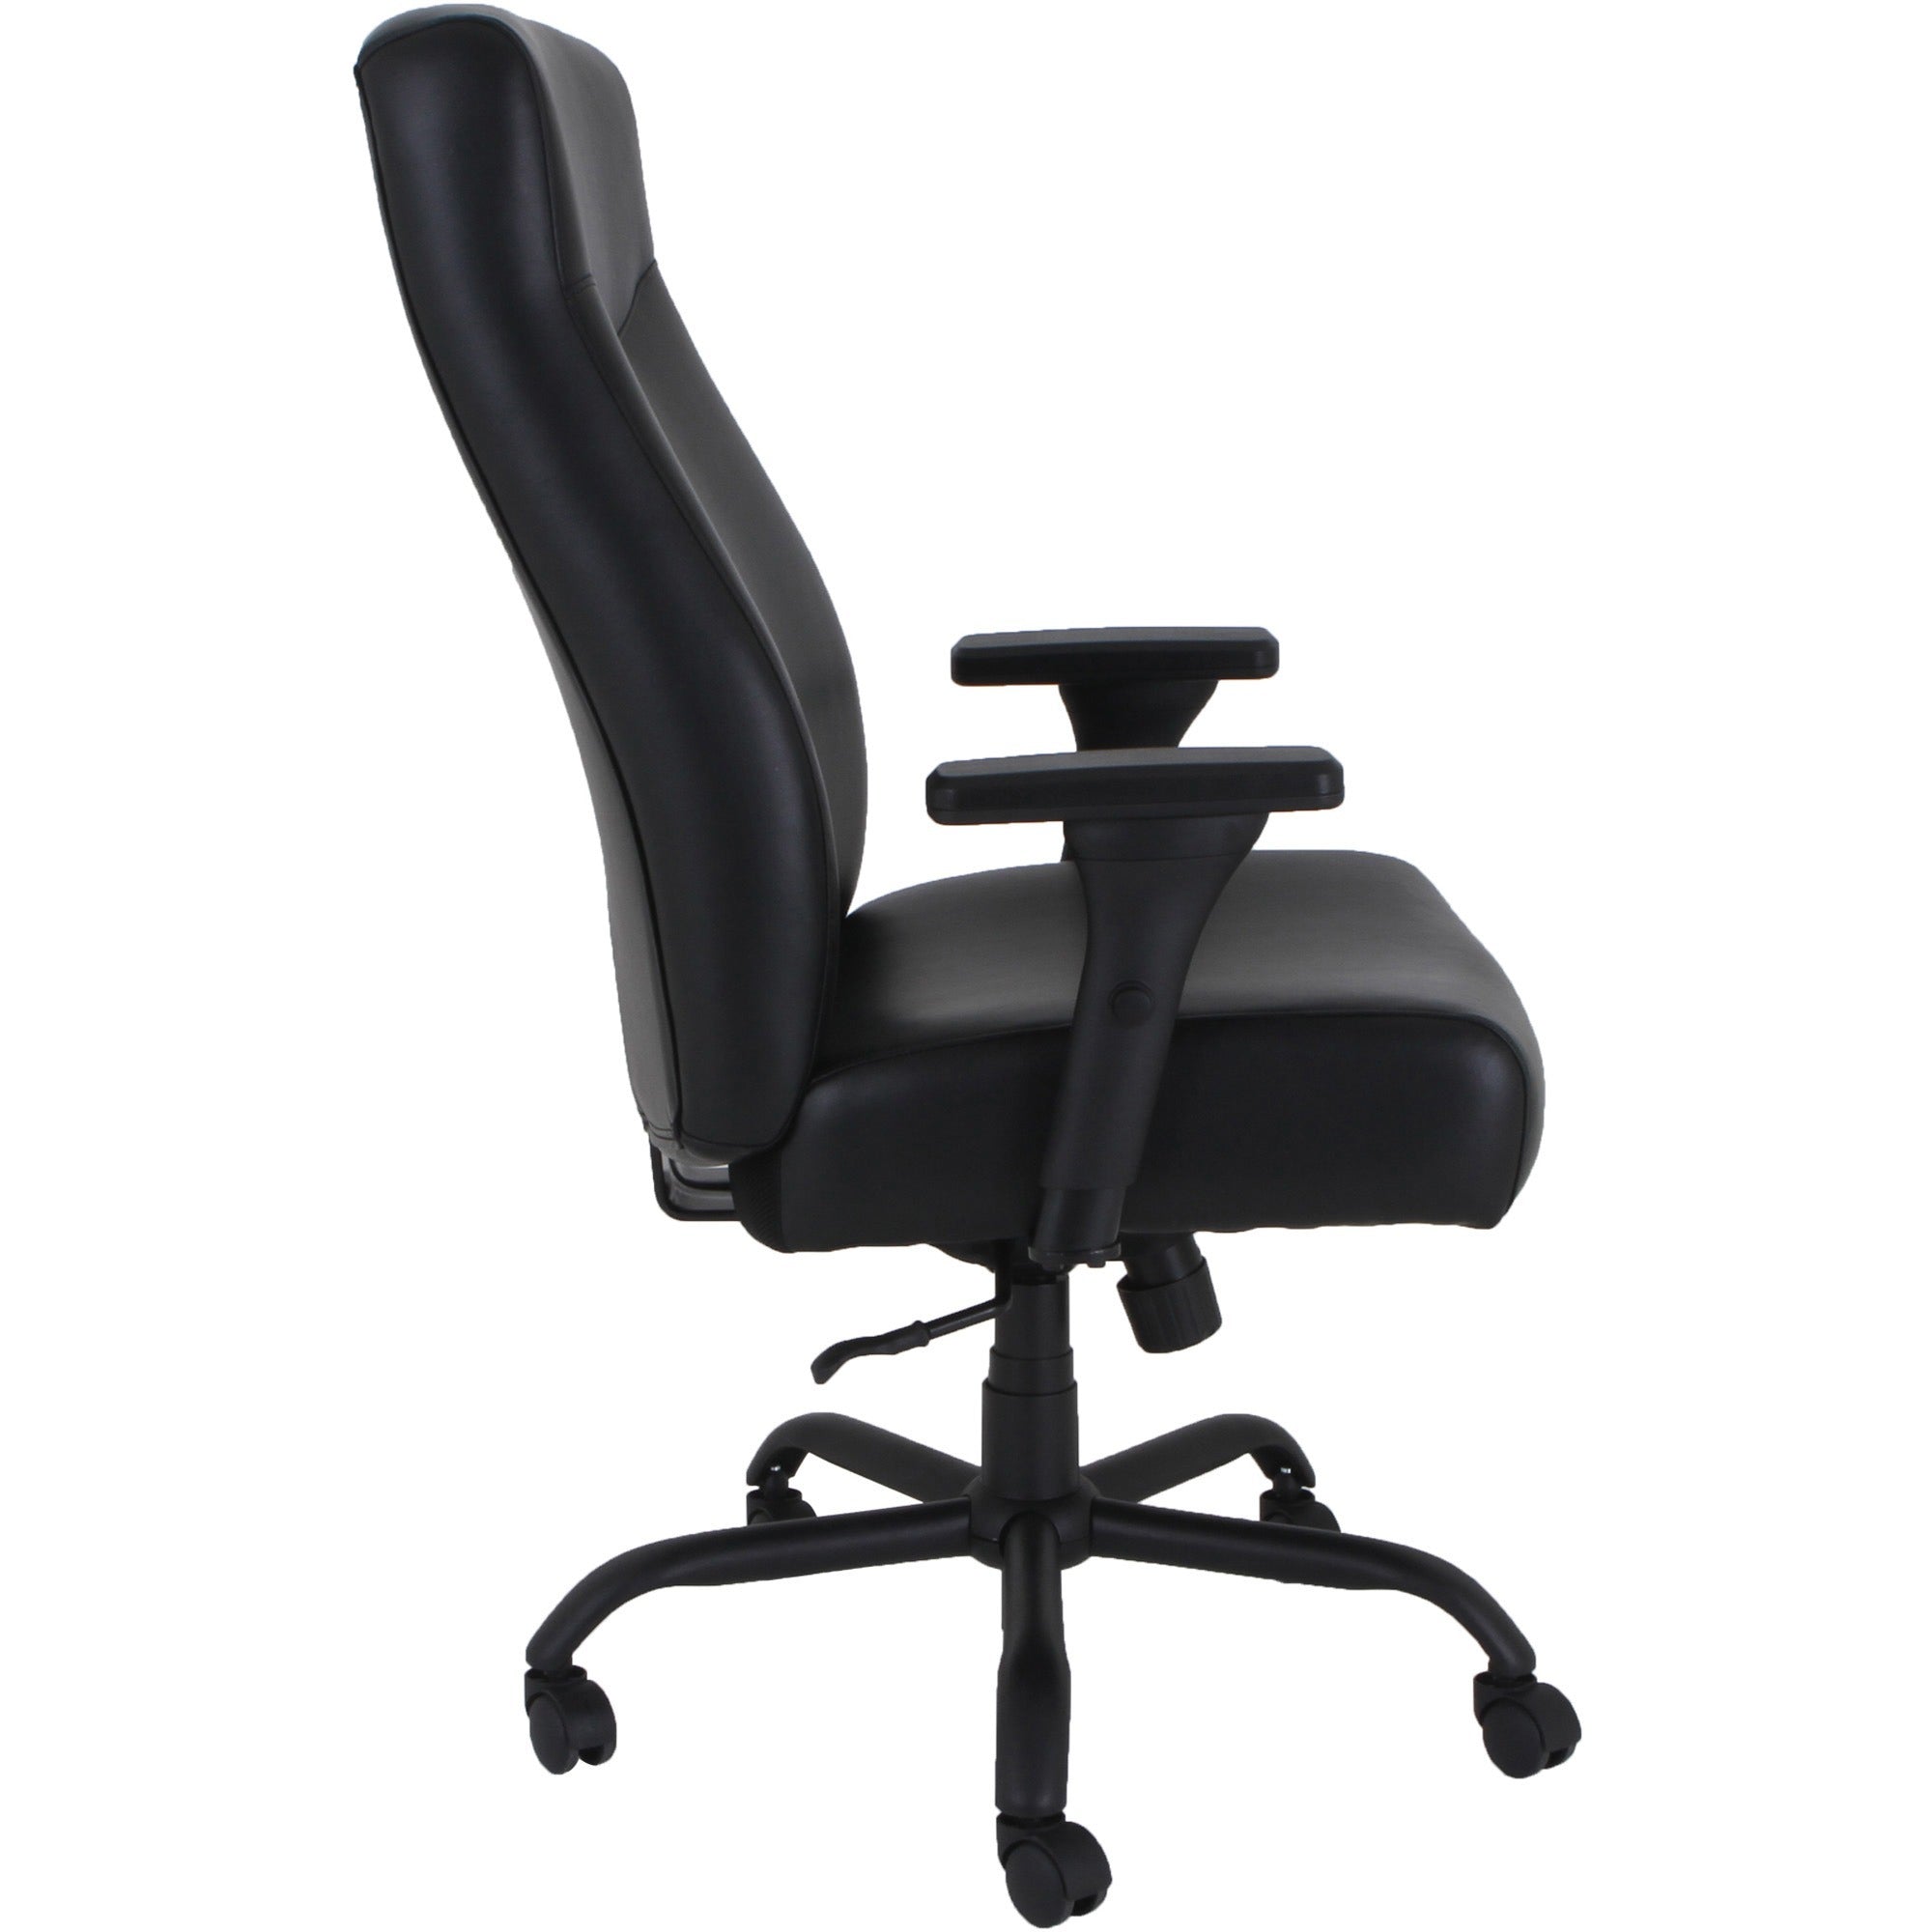 lorell-big-&-tall-executive-high-back-chair-with-adjustable-arms-black-bonded-leather-seat-black-bonded-leather-back-high-back-5-star-base-armrest-1-each_llr48846 - 6